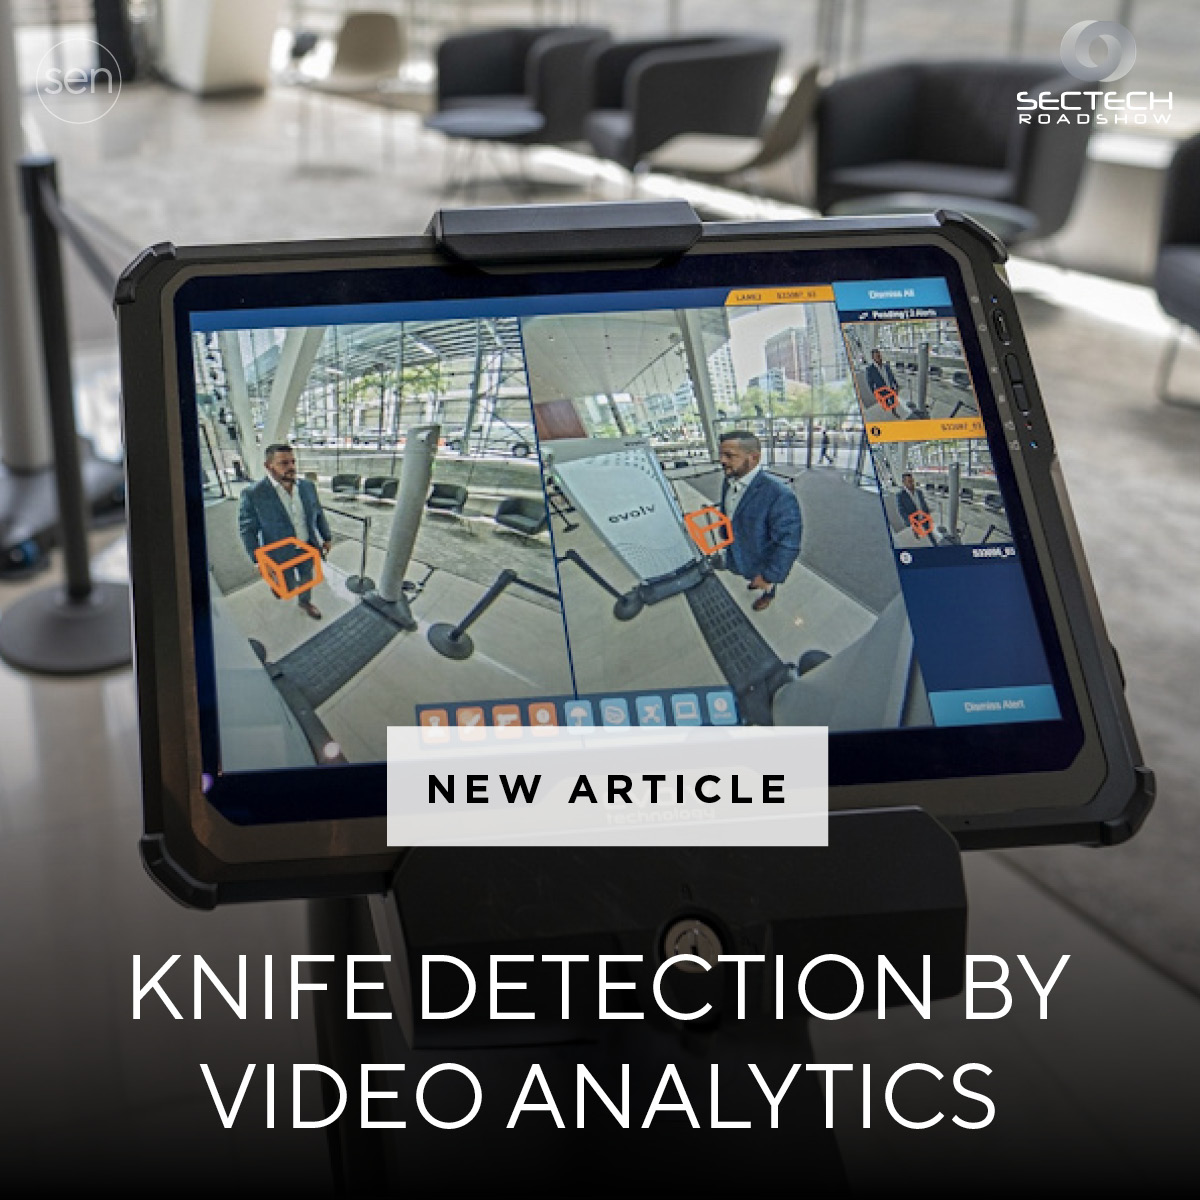 sen.news/knife-detectio…
'Knife and gun detection analytics might allow faster situational awareness and more rapid response to incidents, but it’s not plug and play.'
#analytics #videoanalytics #data #securityintegration #managementsoftware #securitymanagement #SEN